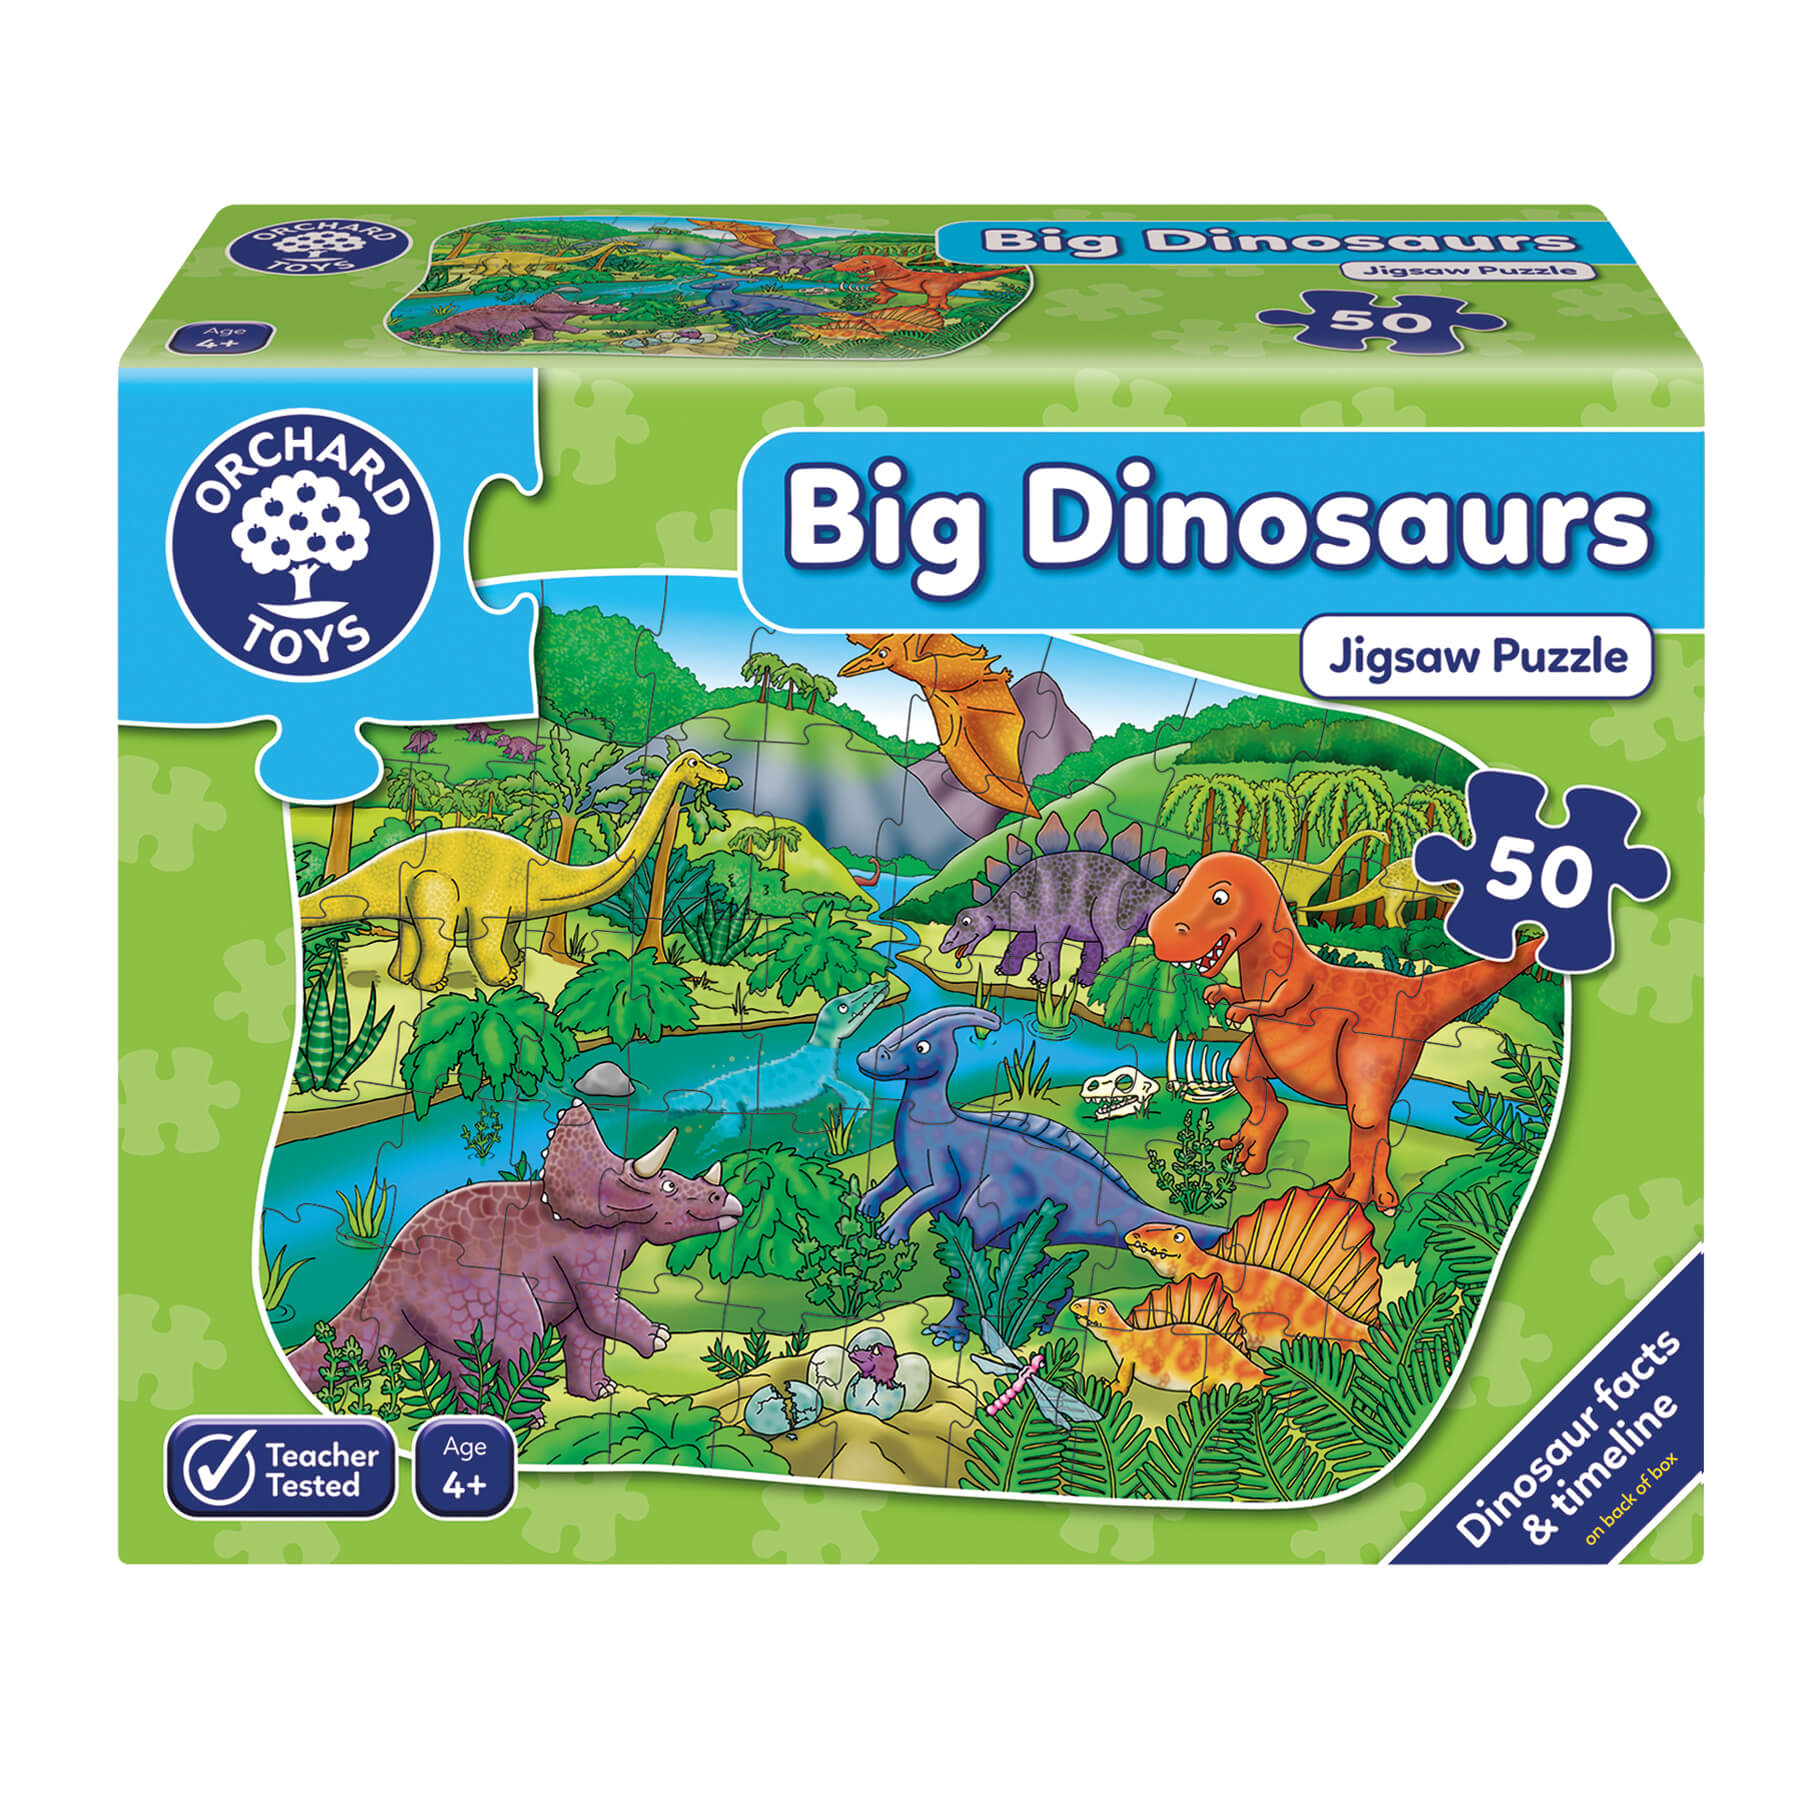 Big Dinosaurs - Jigsaw Puzzle Product View